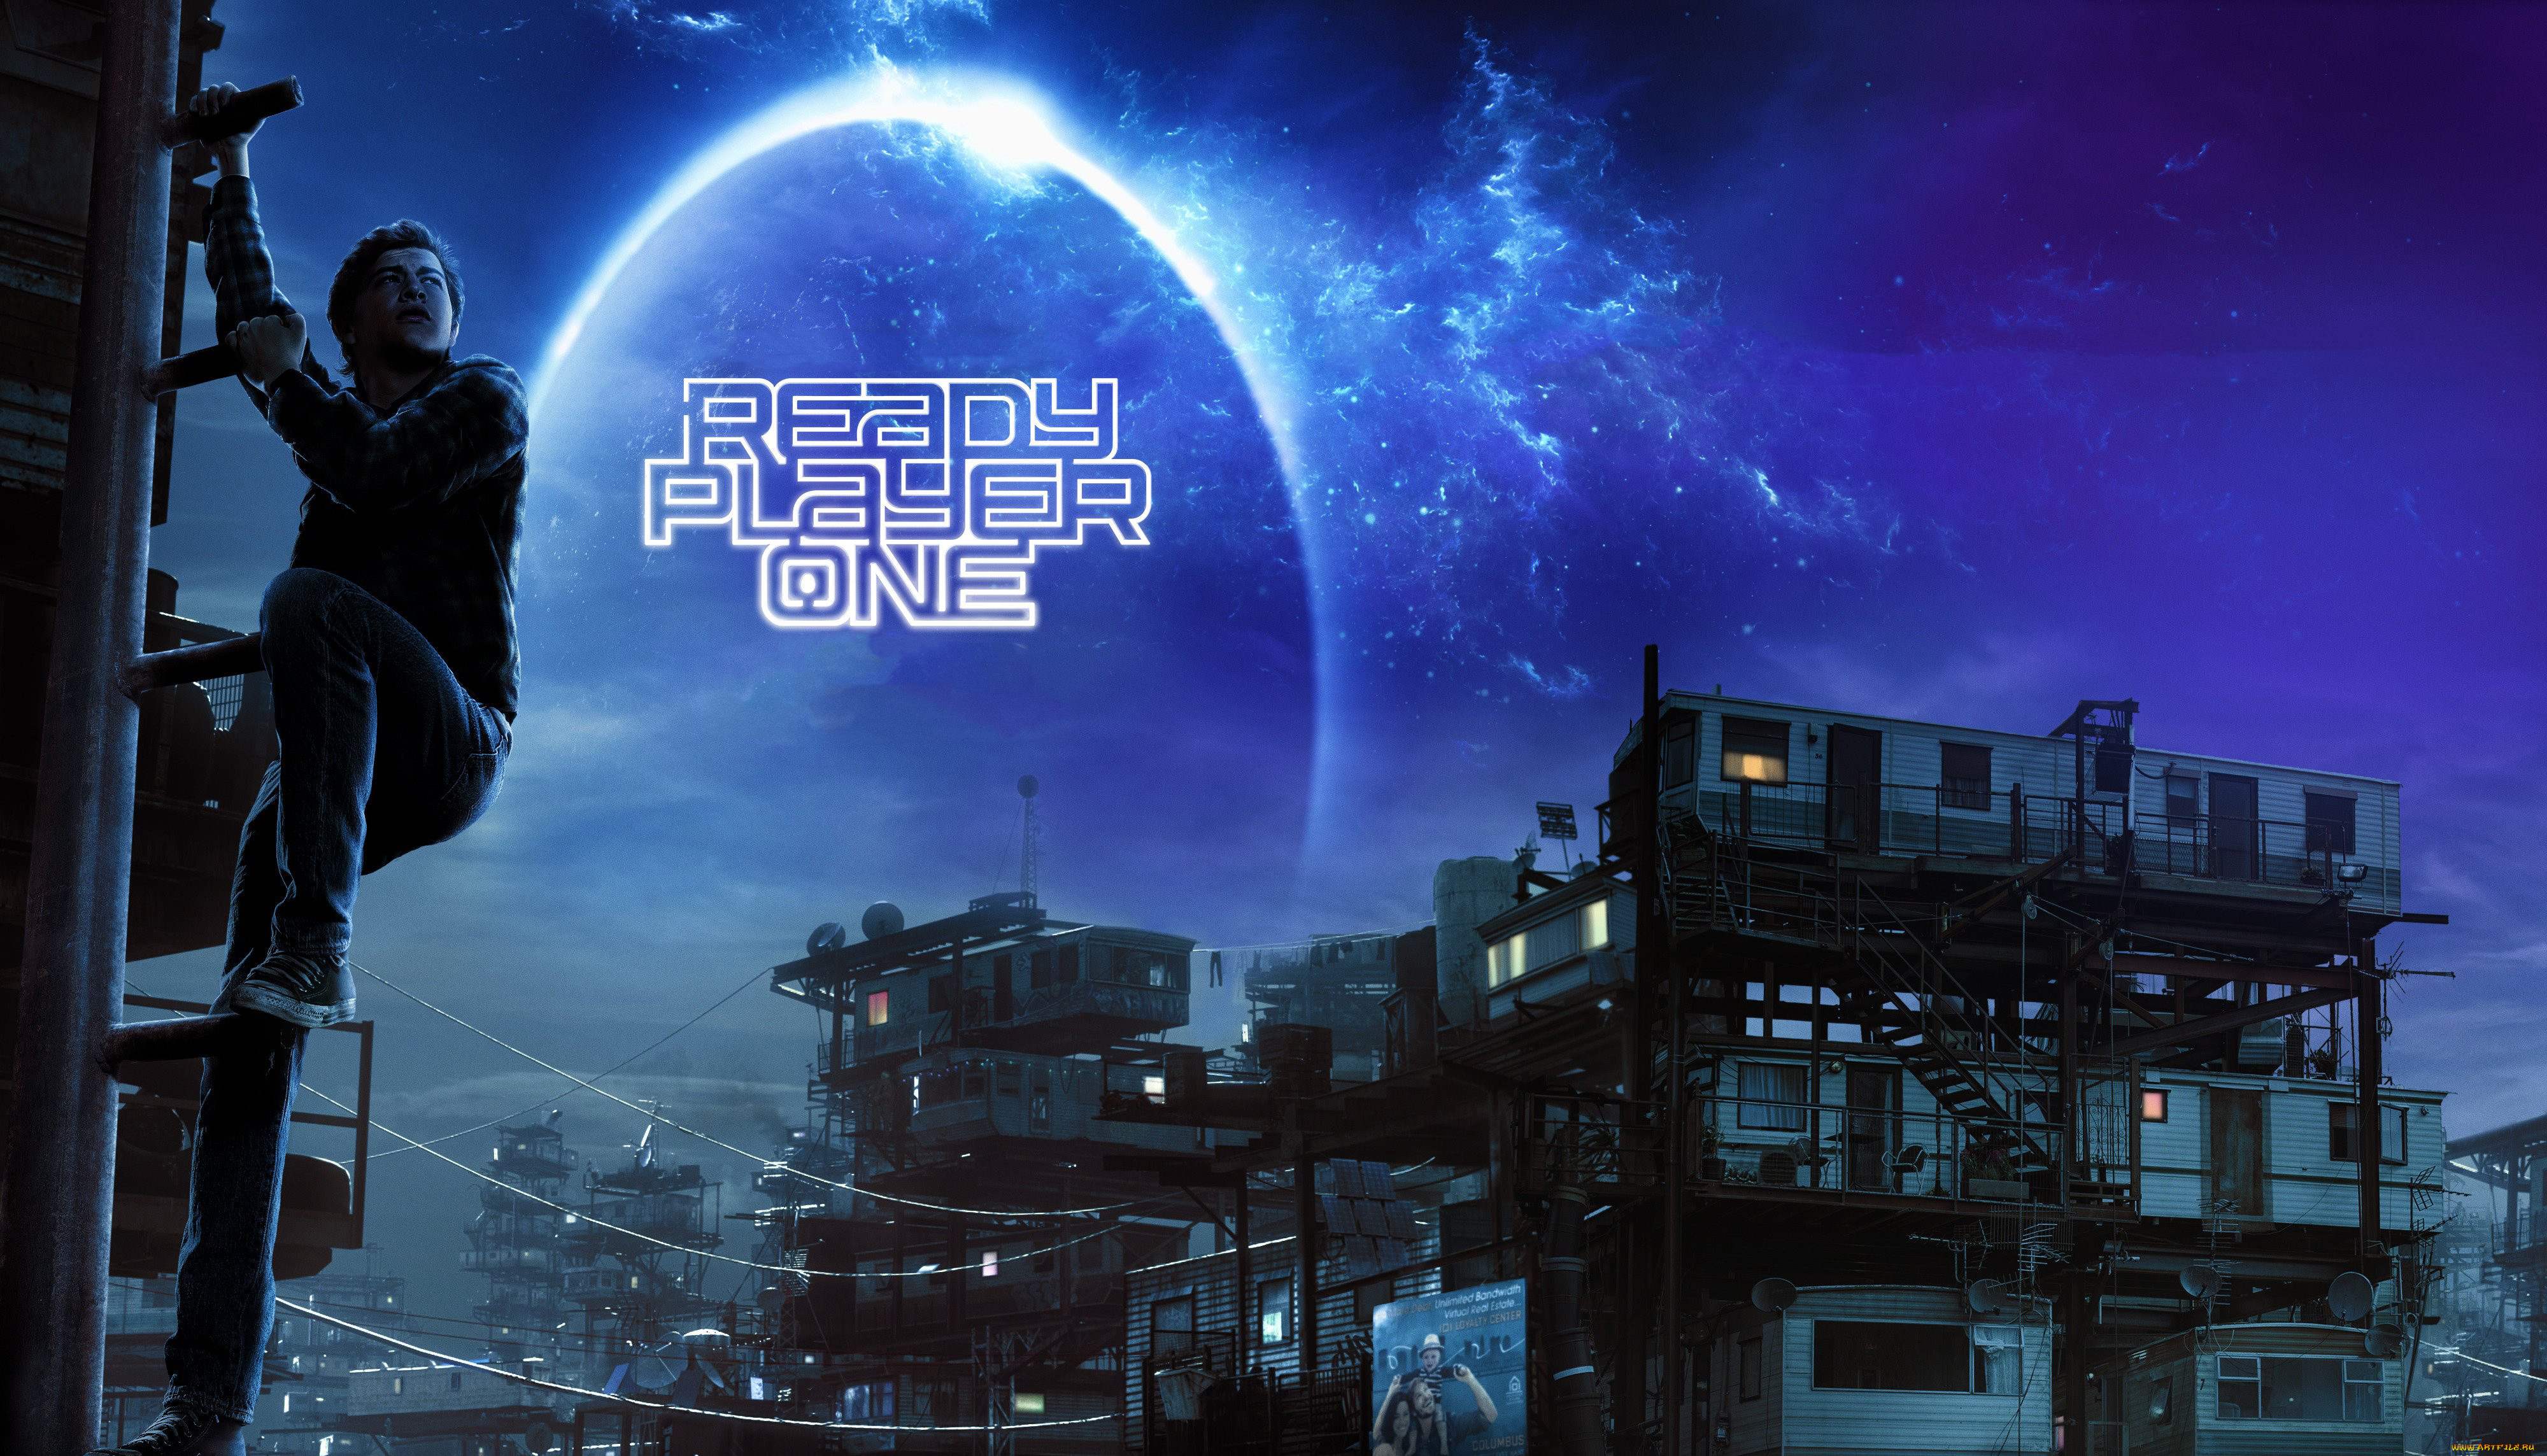  , ready player one, oasis, , 2018, , , , ready, player, one